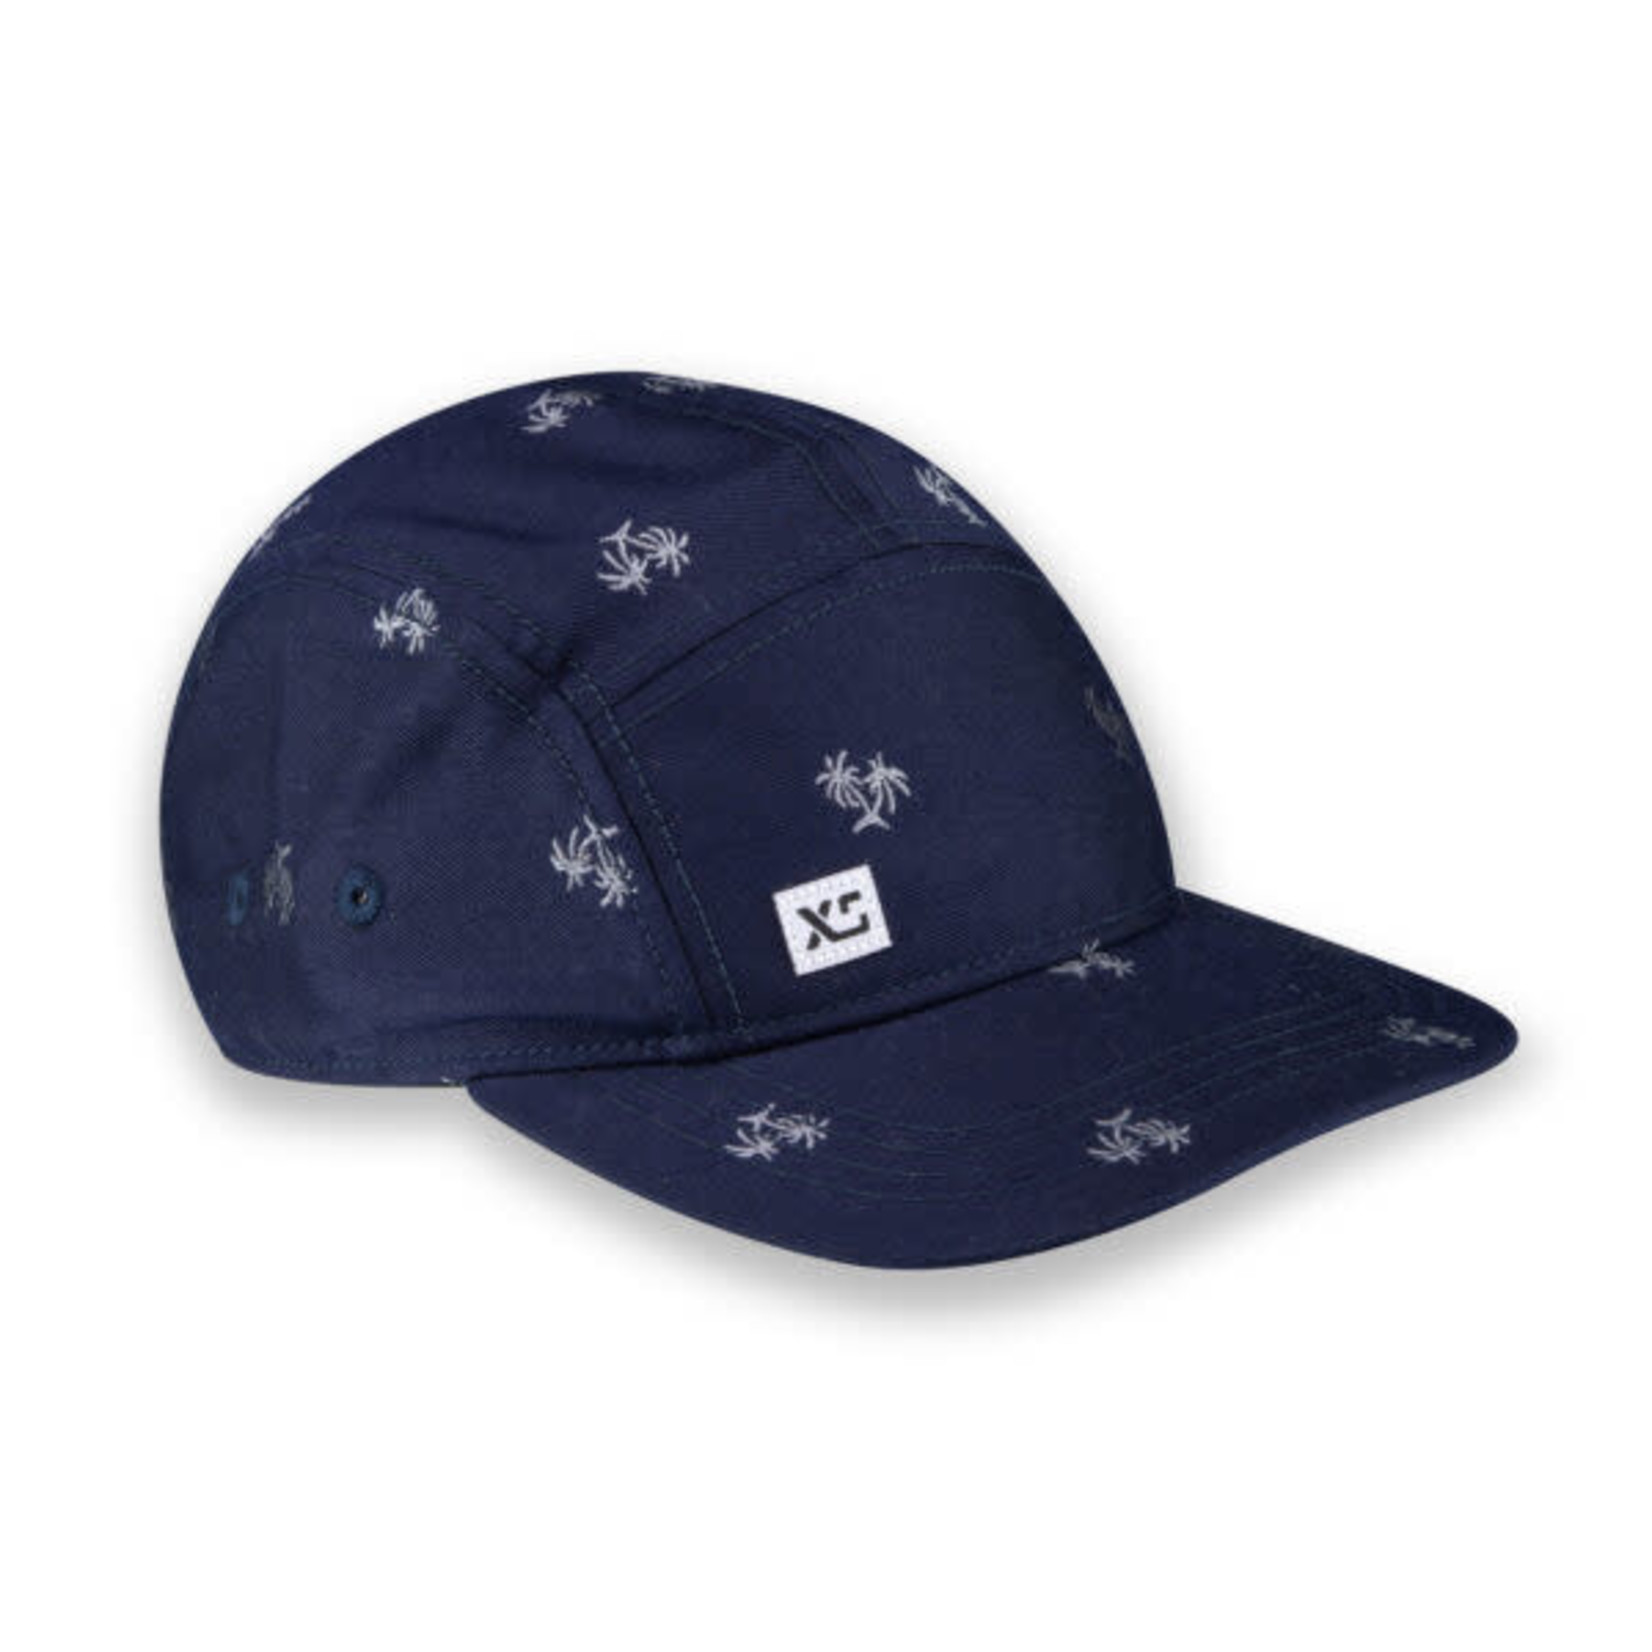 XS Unified 5-Panel Hat - Bishop's Family Cycles